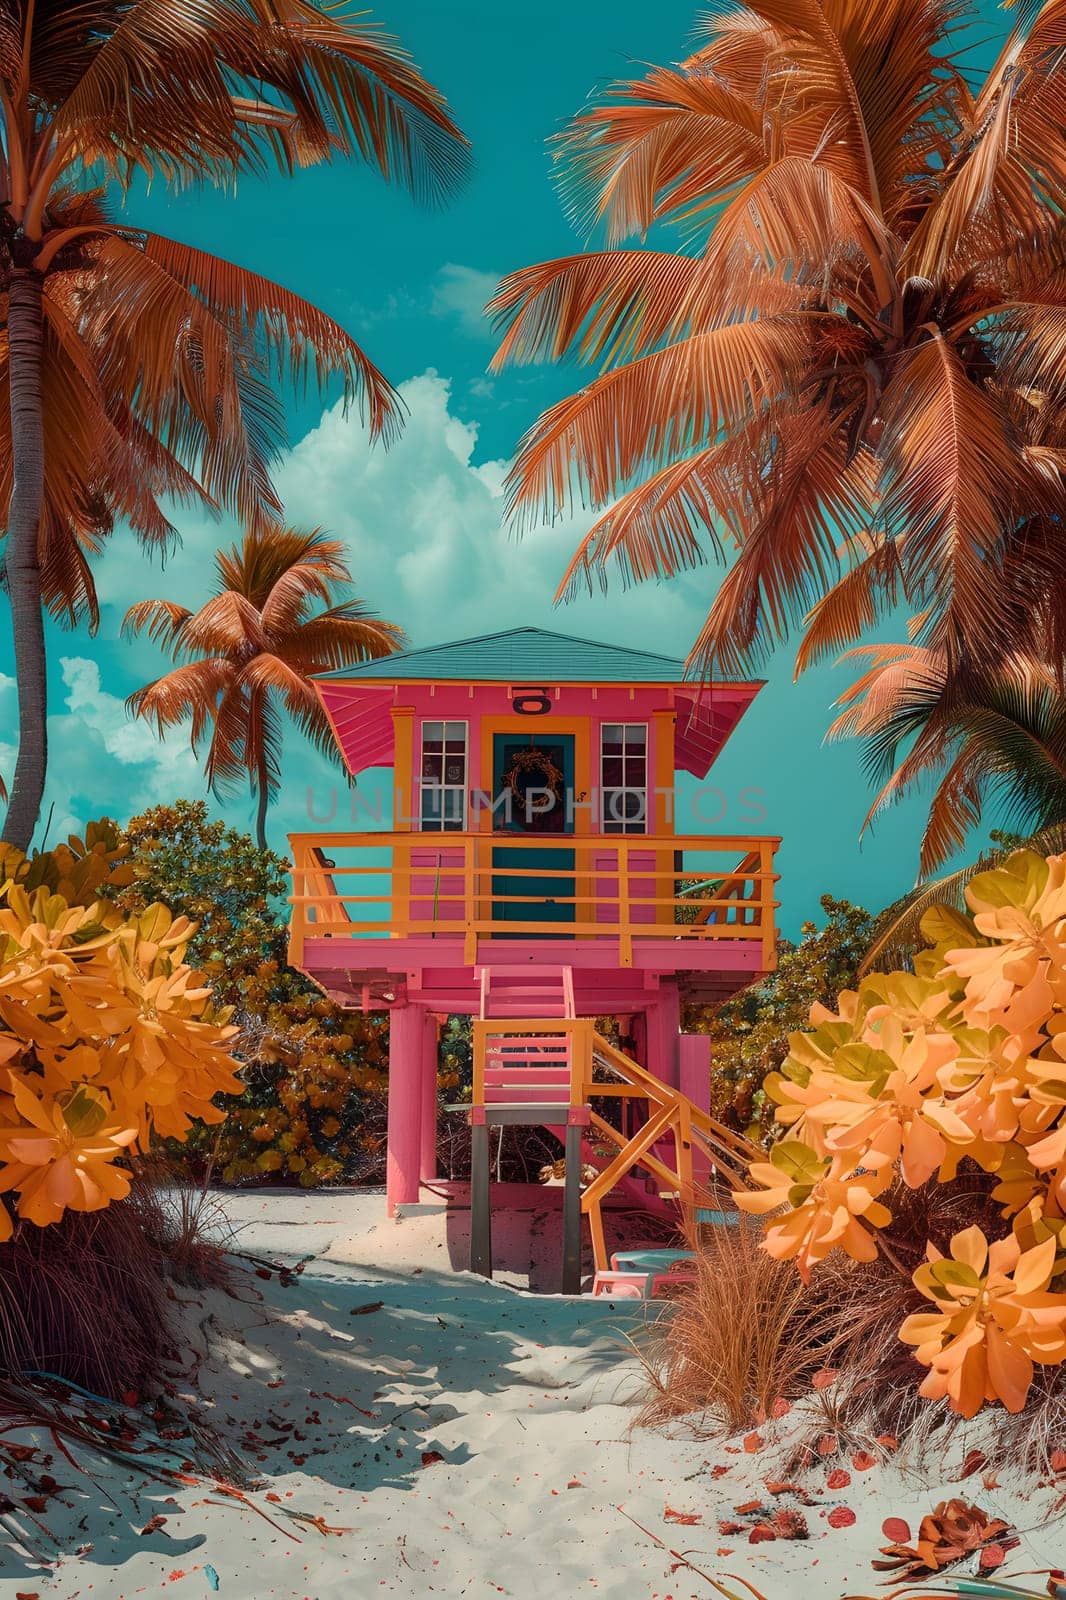 A pink and yellow lifeguard tower surrounded by palm trees on a beach by Nadtochiy